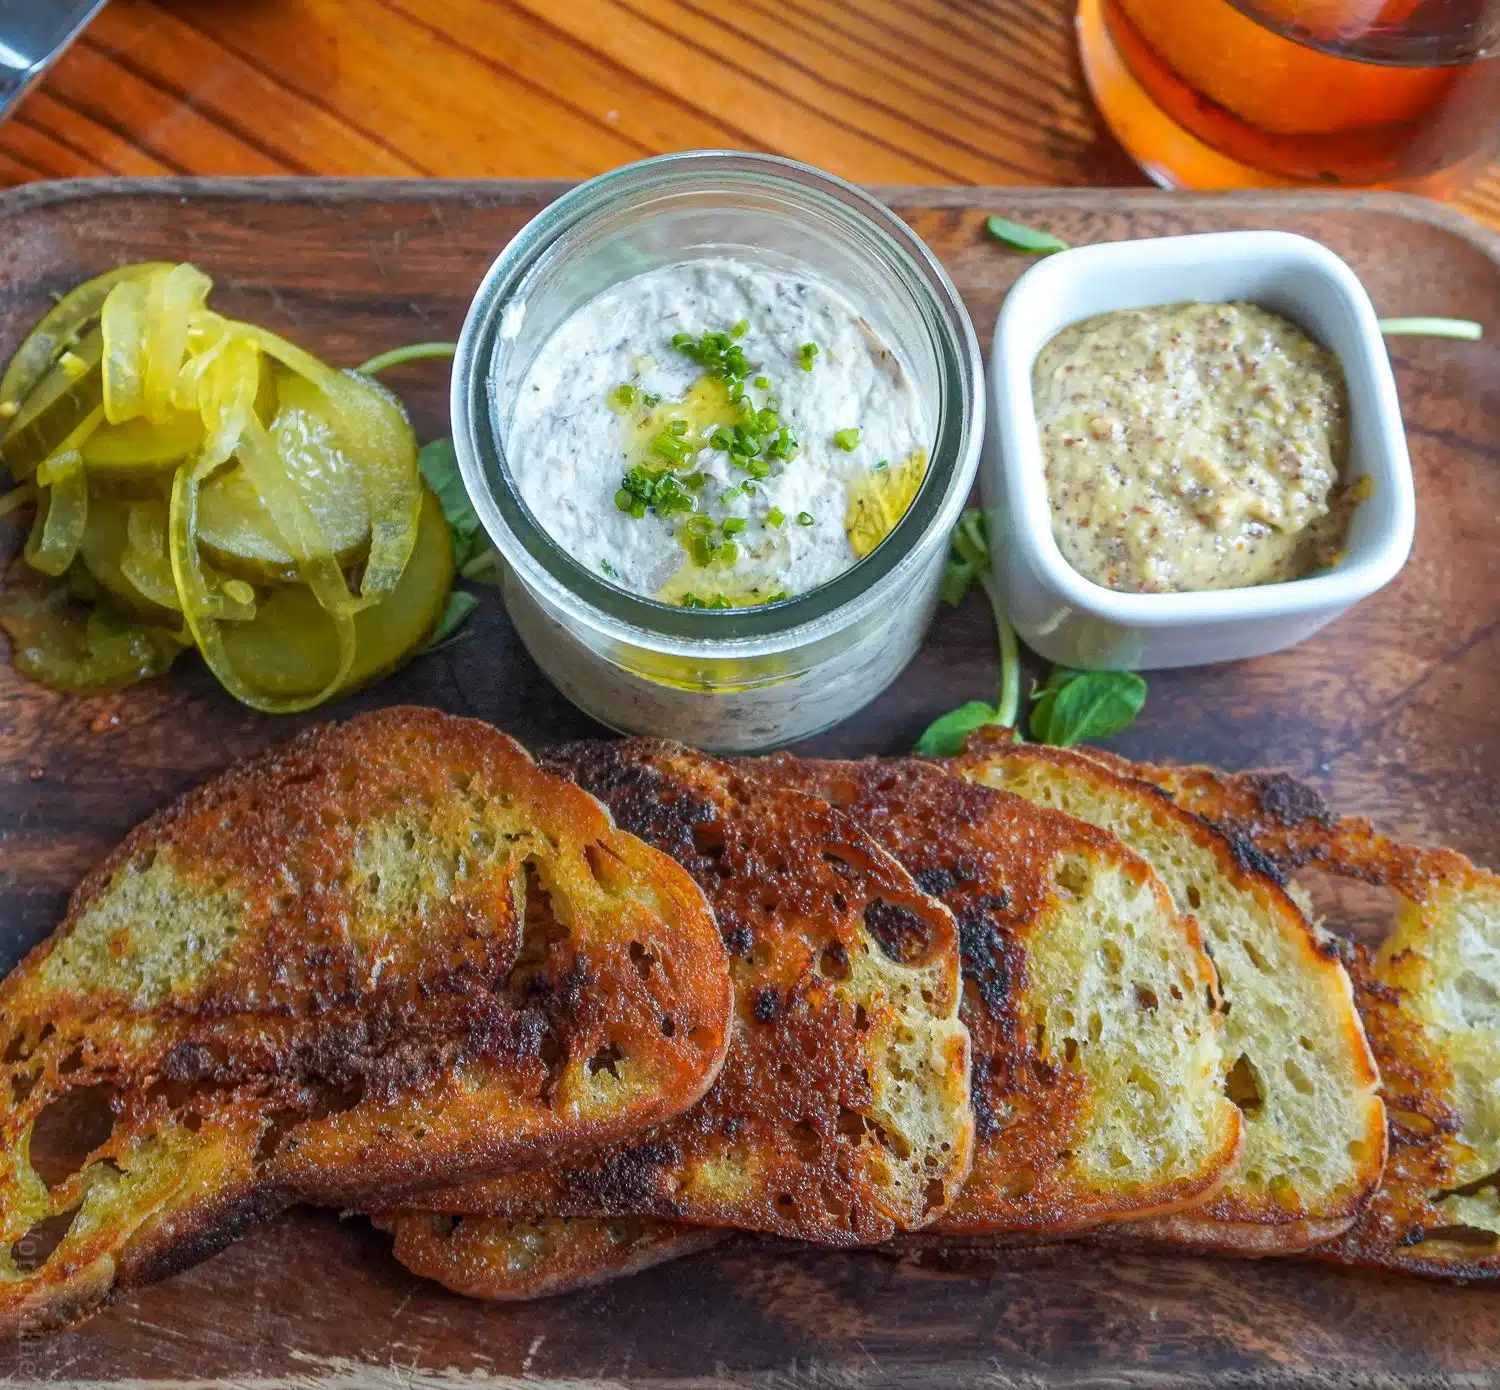 Smoked bluefish pate, mustard, pickles, and toast at Water Street.